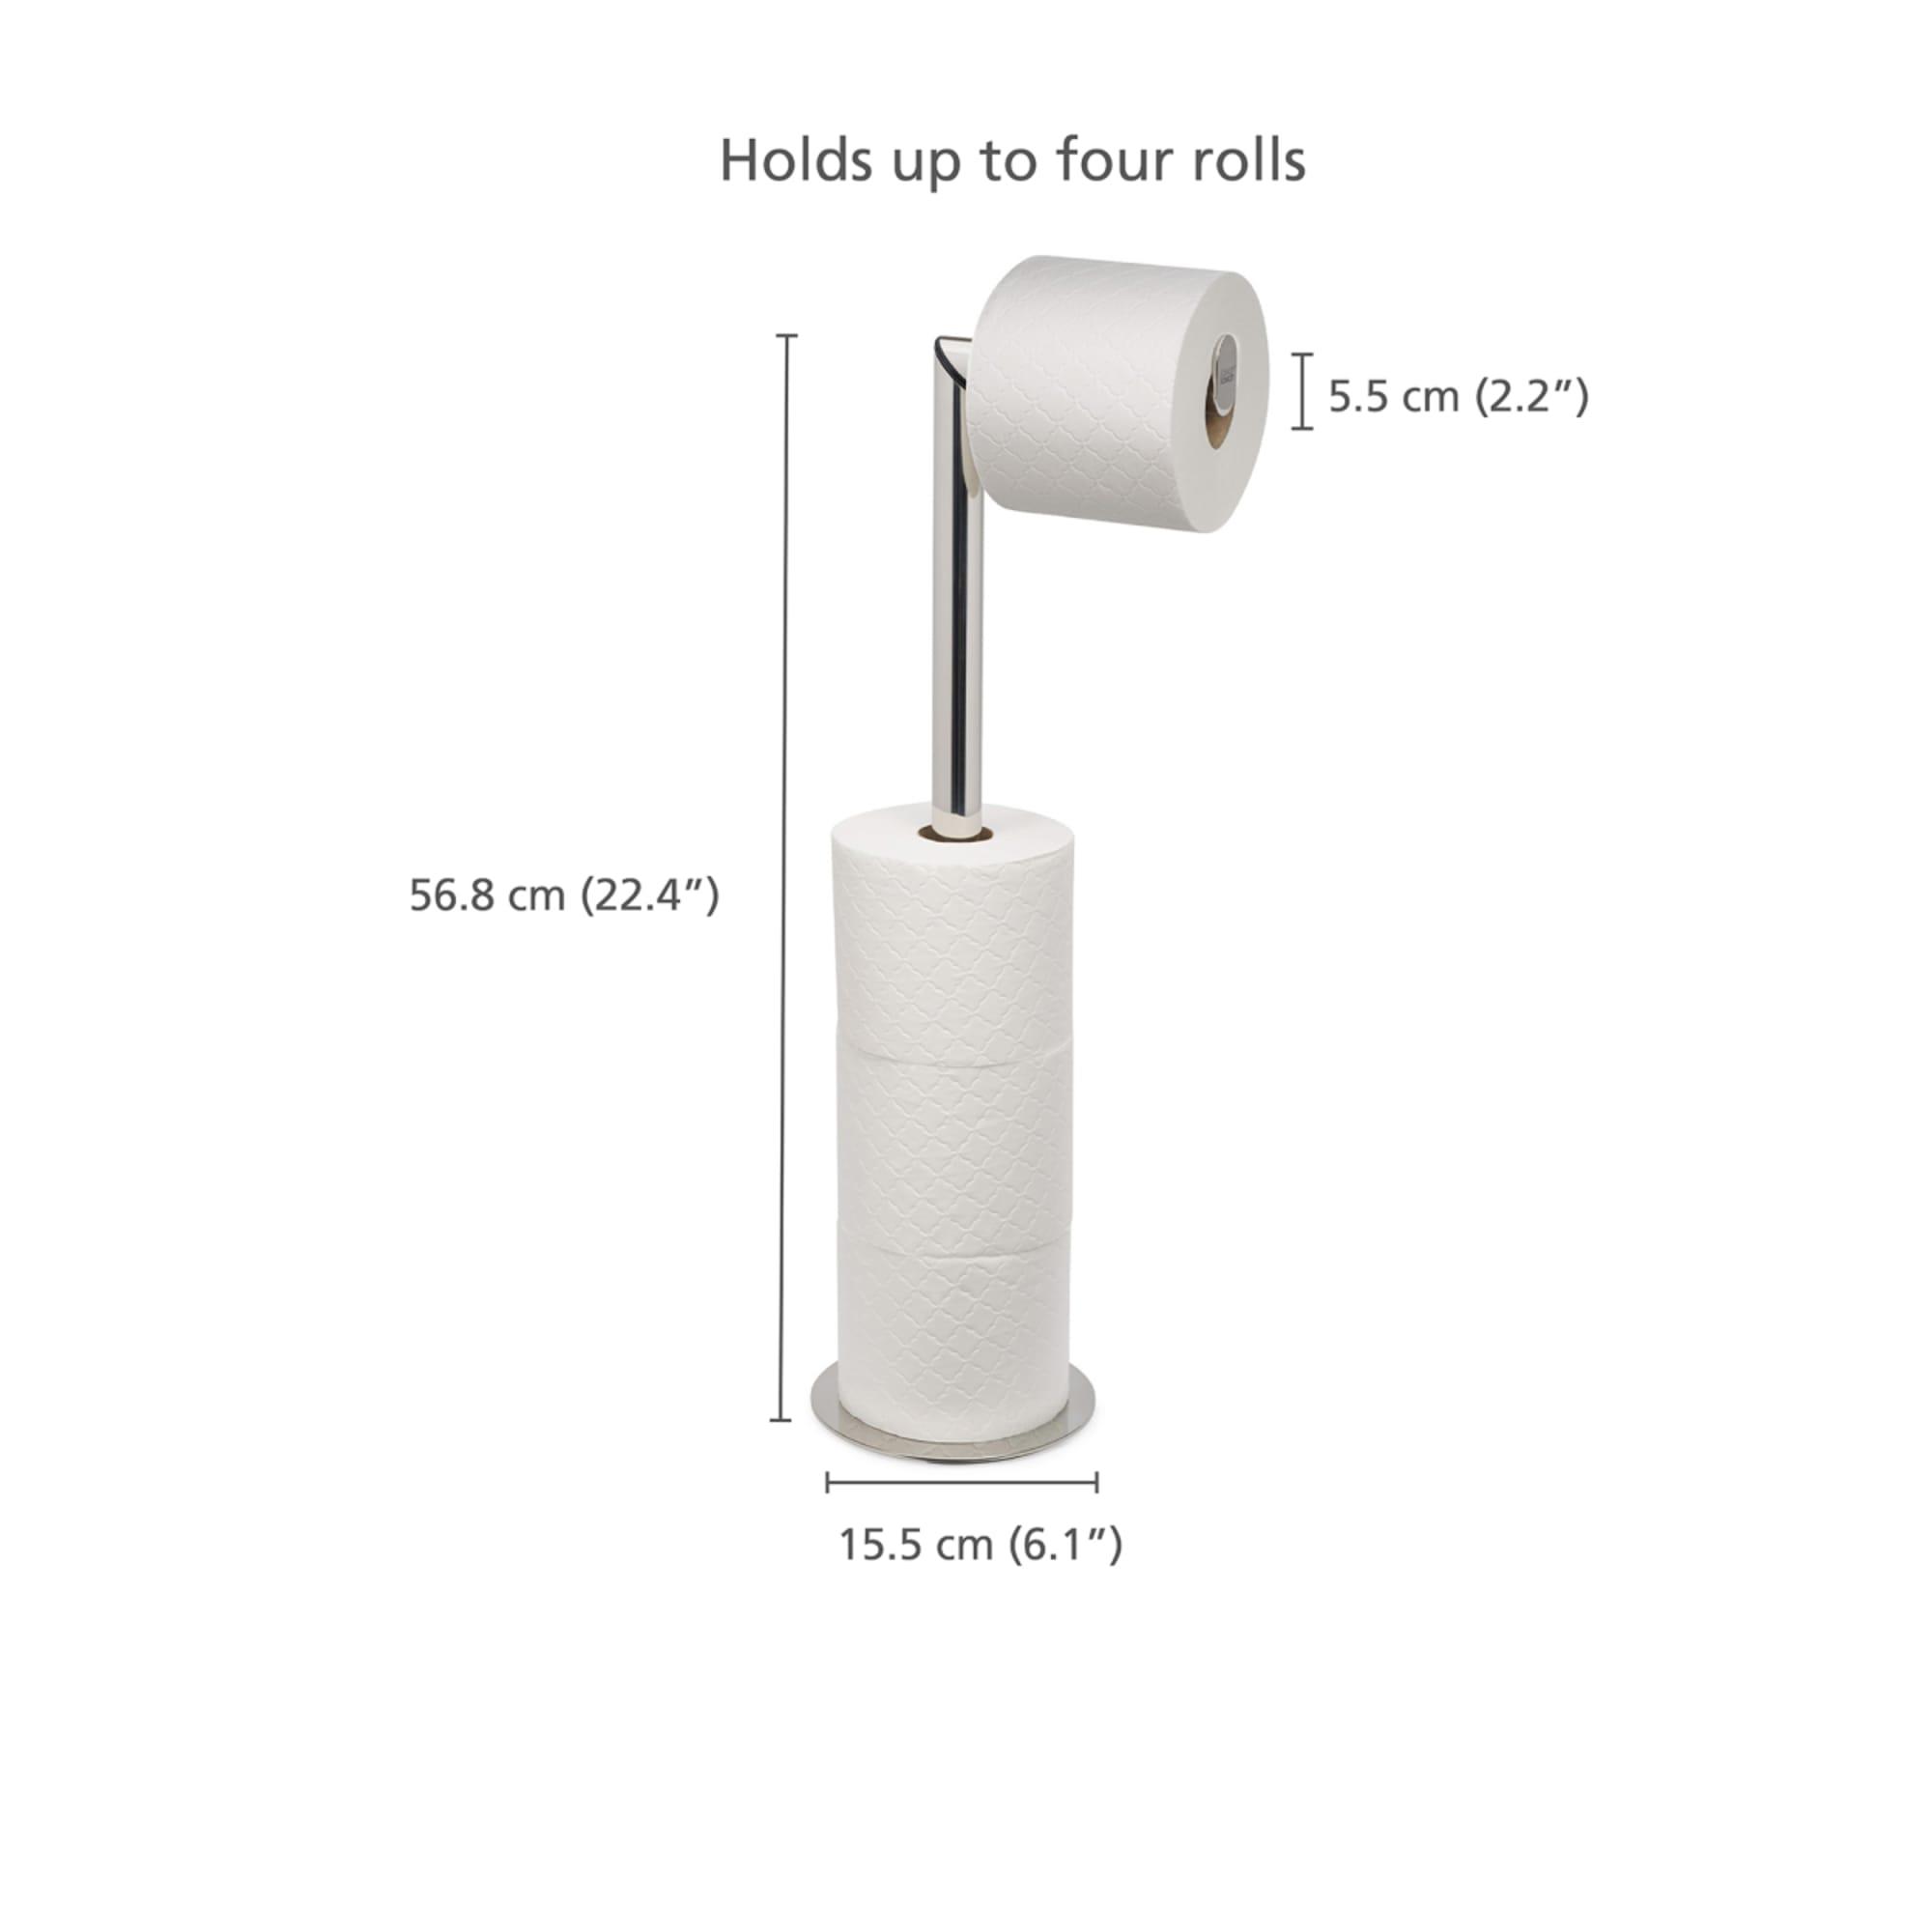 Joseph Joseph EasyStore Luxe 2 in 1 Toilet Roll Stand Image 10